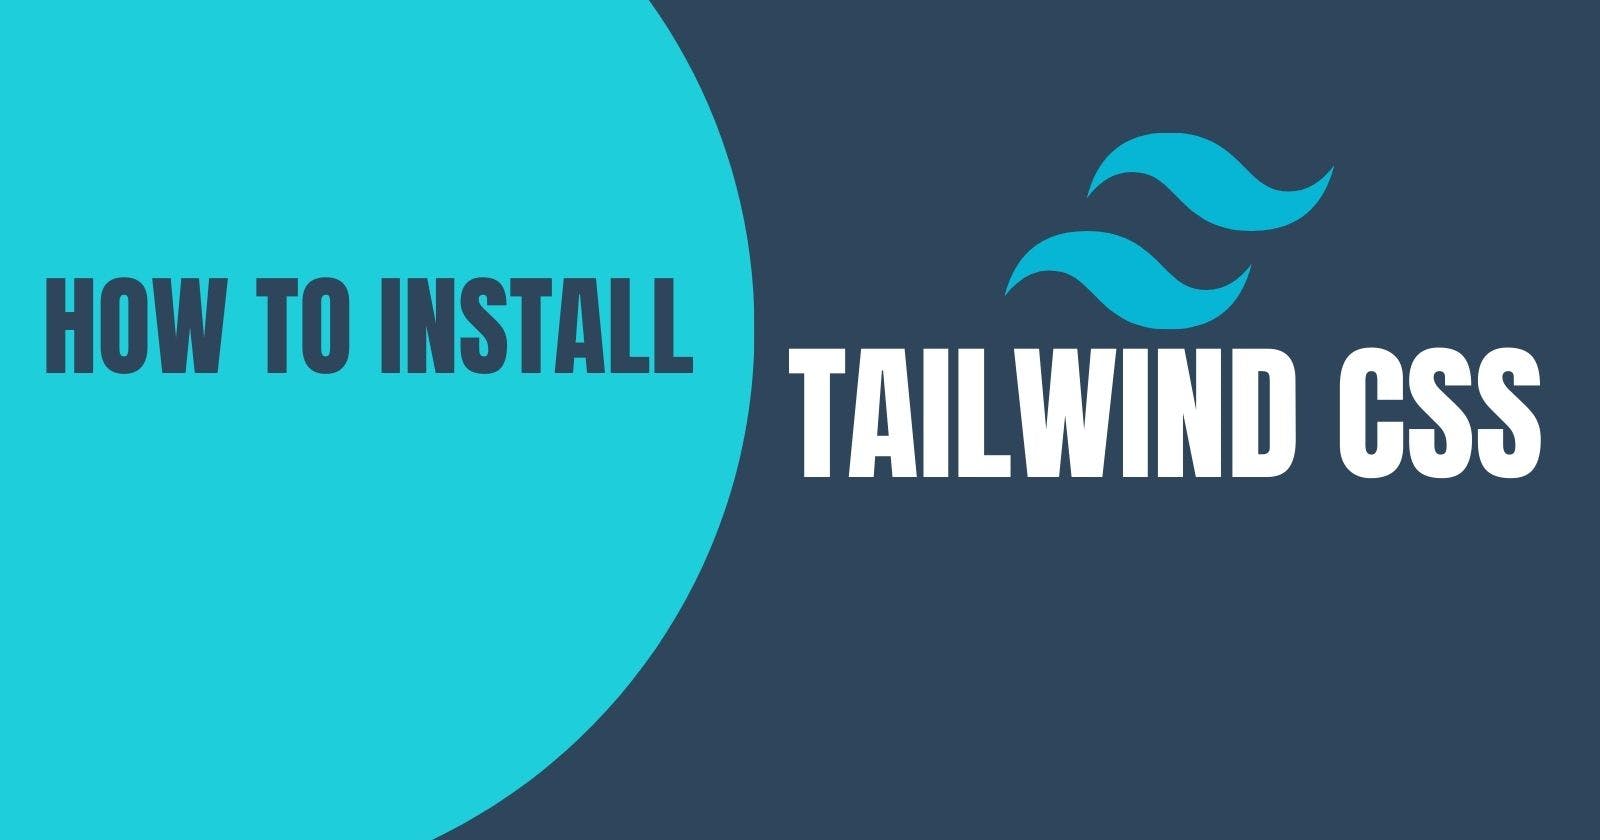 How to install TailwindCss: Full installation process